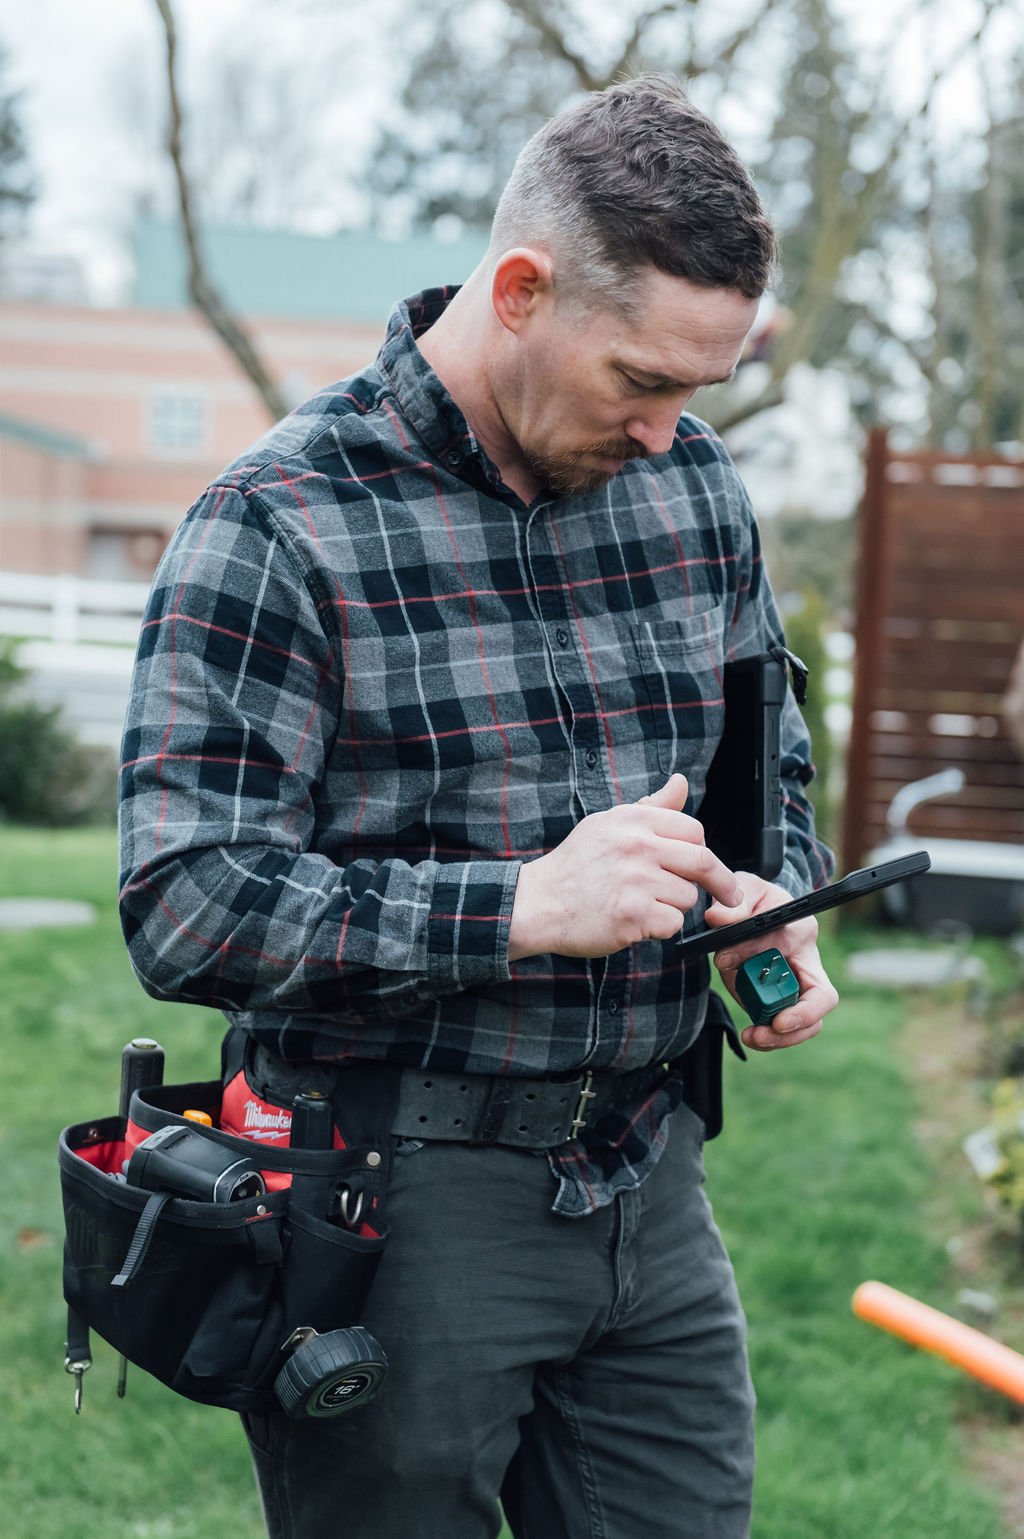 An expert man conducting a property inspection, standing in front of a house with a tablet and devices.